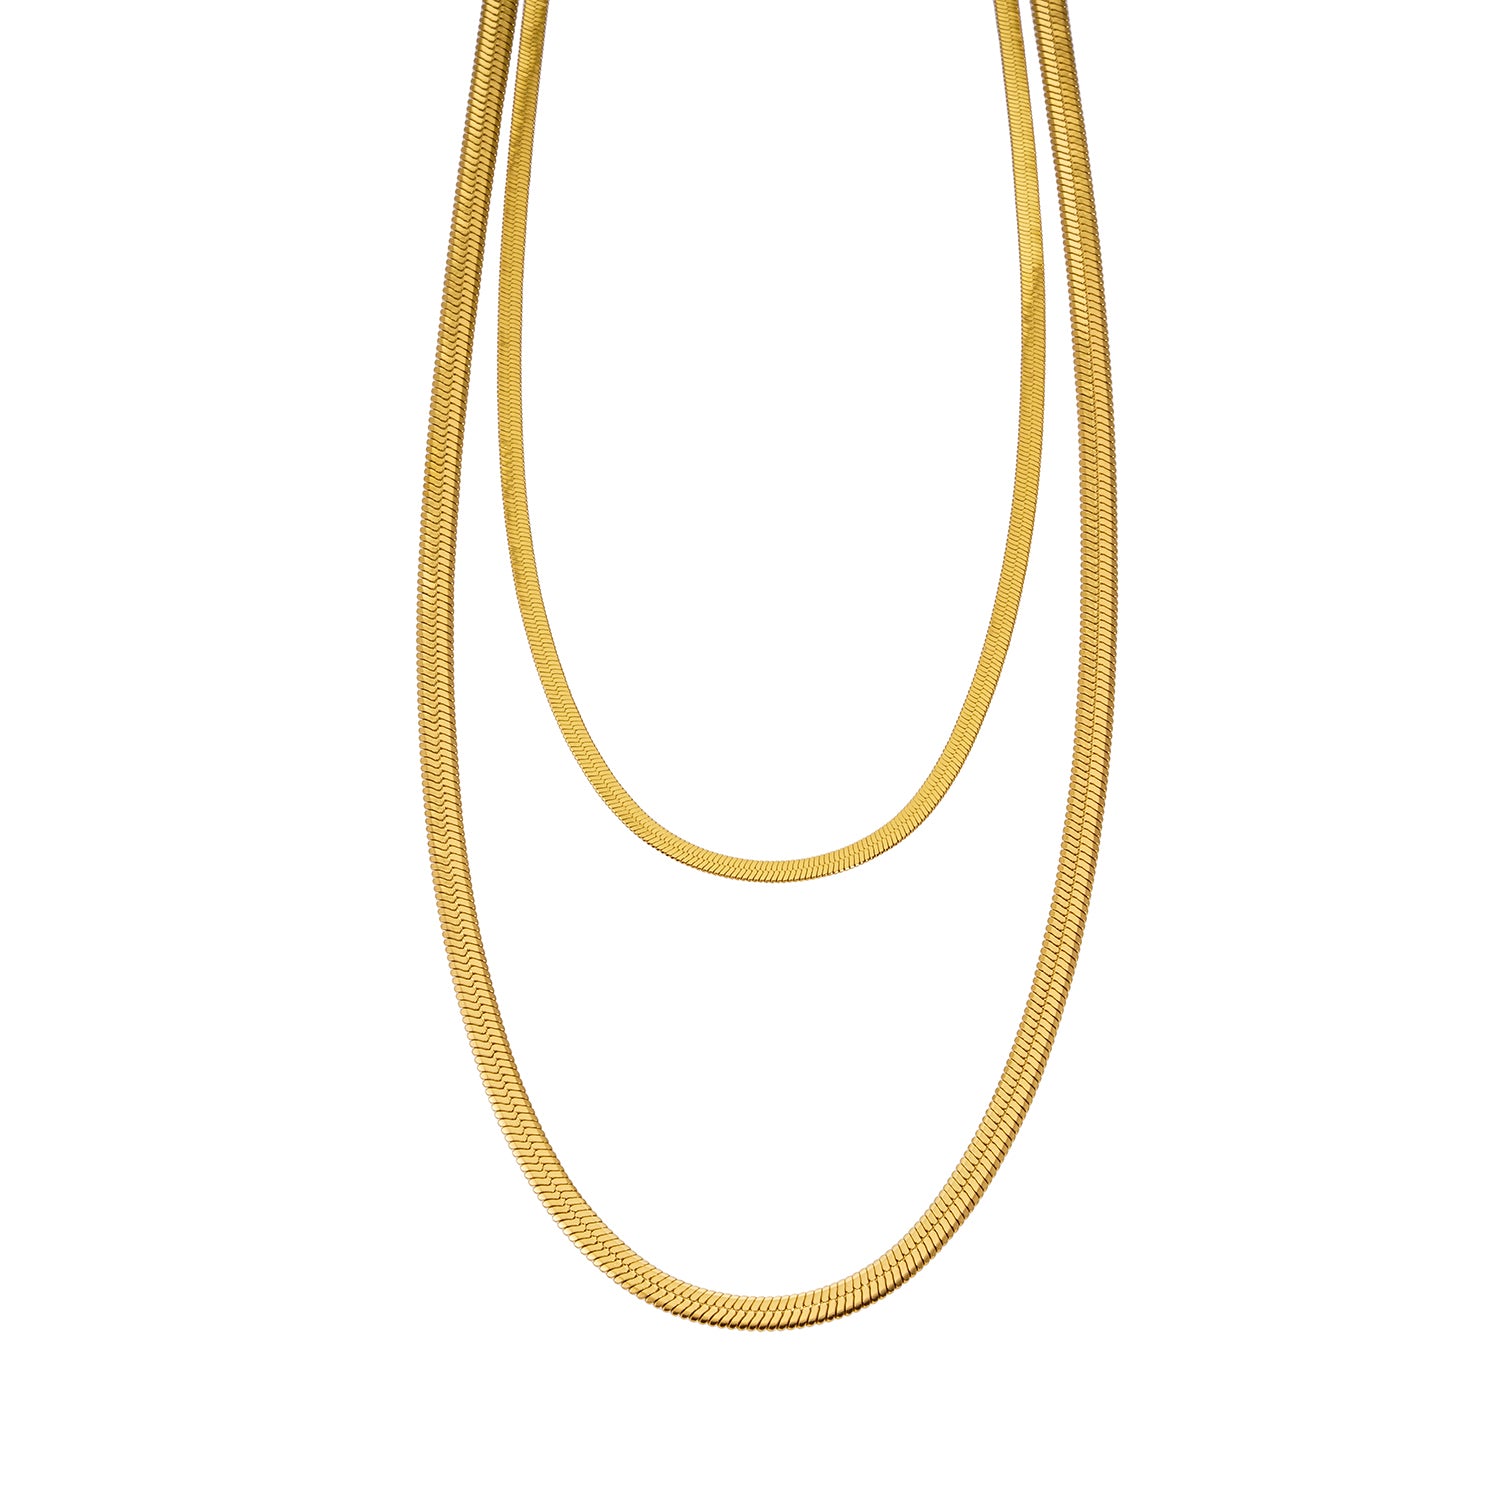 Style GINTA 7312: Snake-Skin Textured 2-Layer Gold Necklace.